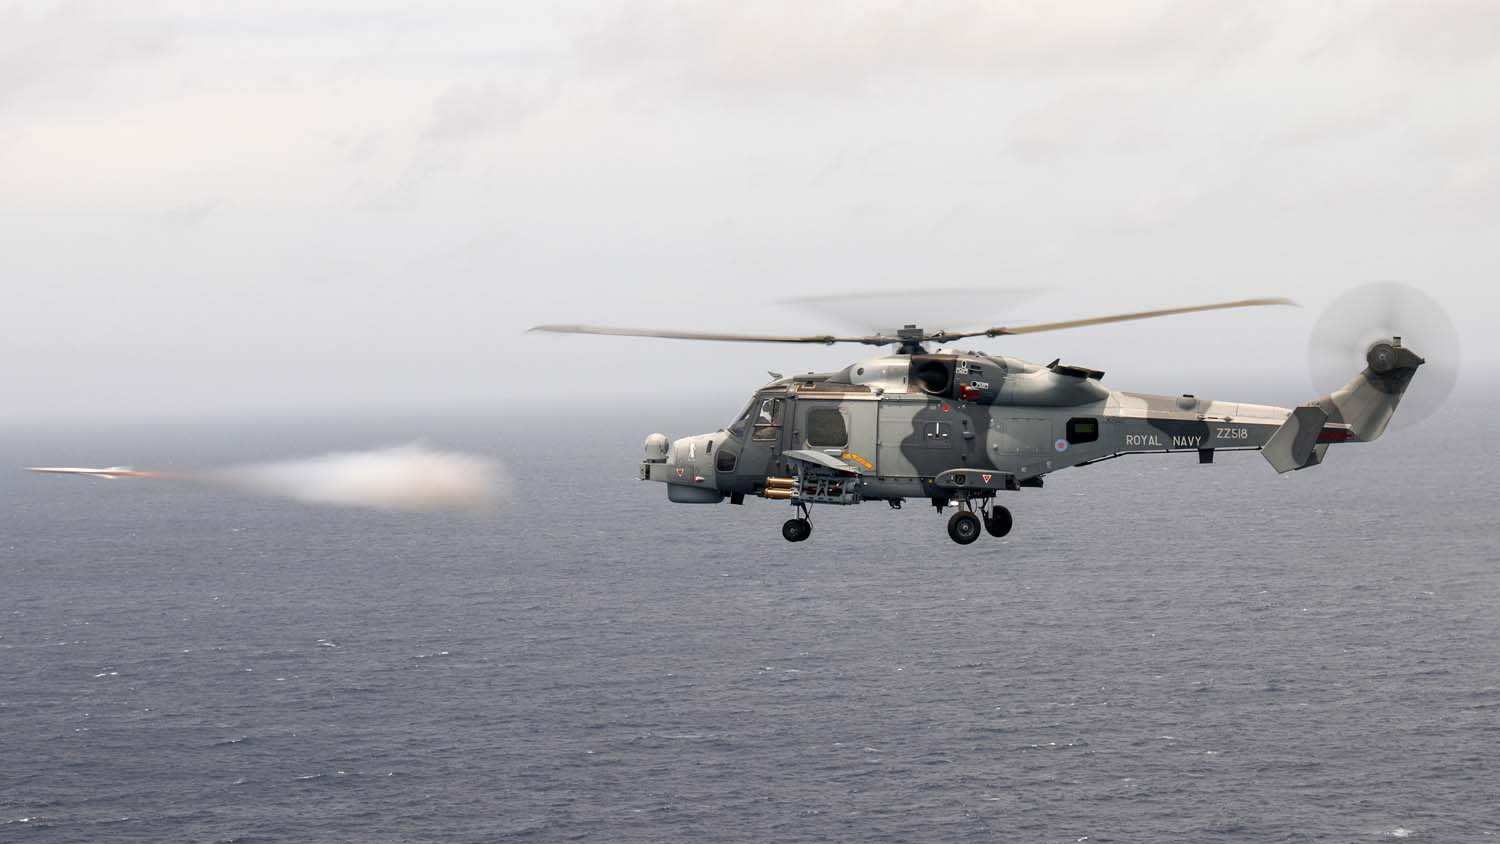 Royal Navy Wildcat Helicopter Tests New Martlet Missile for Defence Against Small Boat Attacks